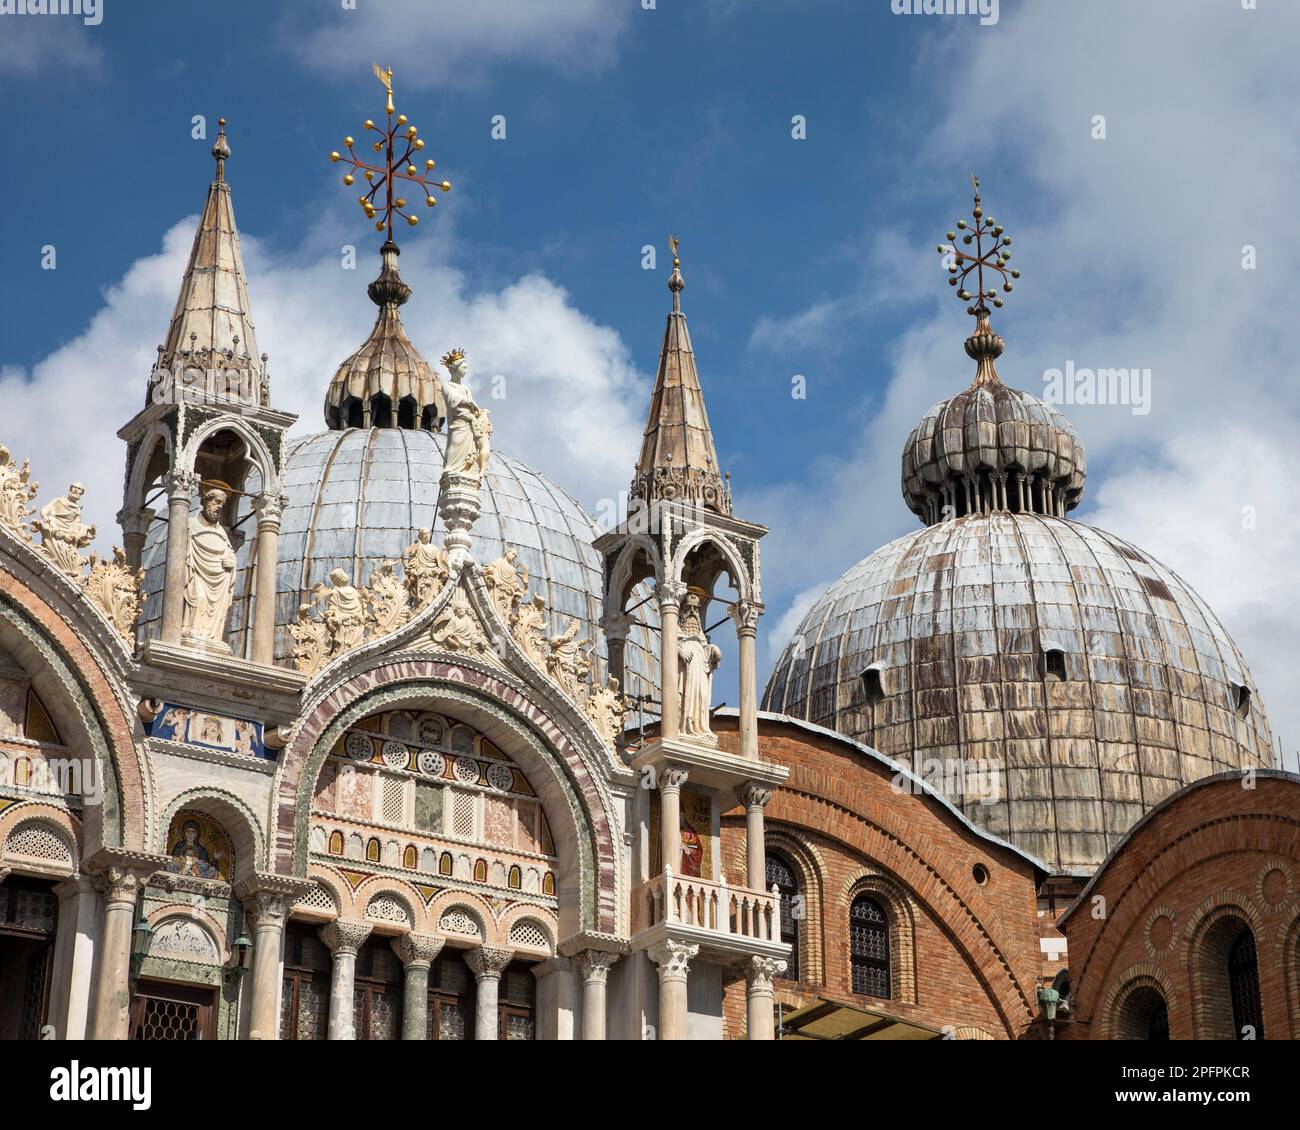 The Basilica di San Marco rises at one end of the Piazza San Marco in Venice, Italy. Stock Photo